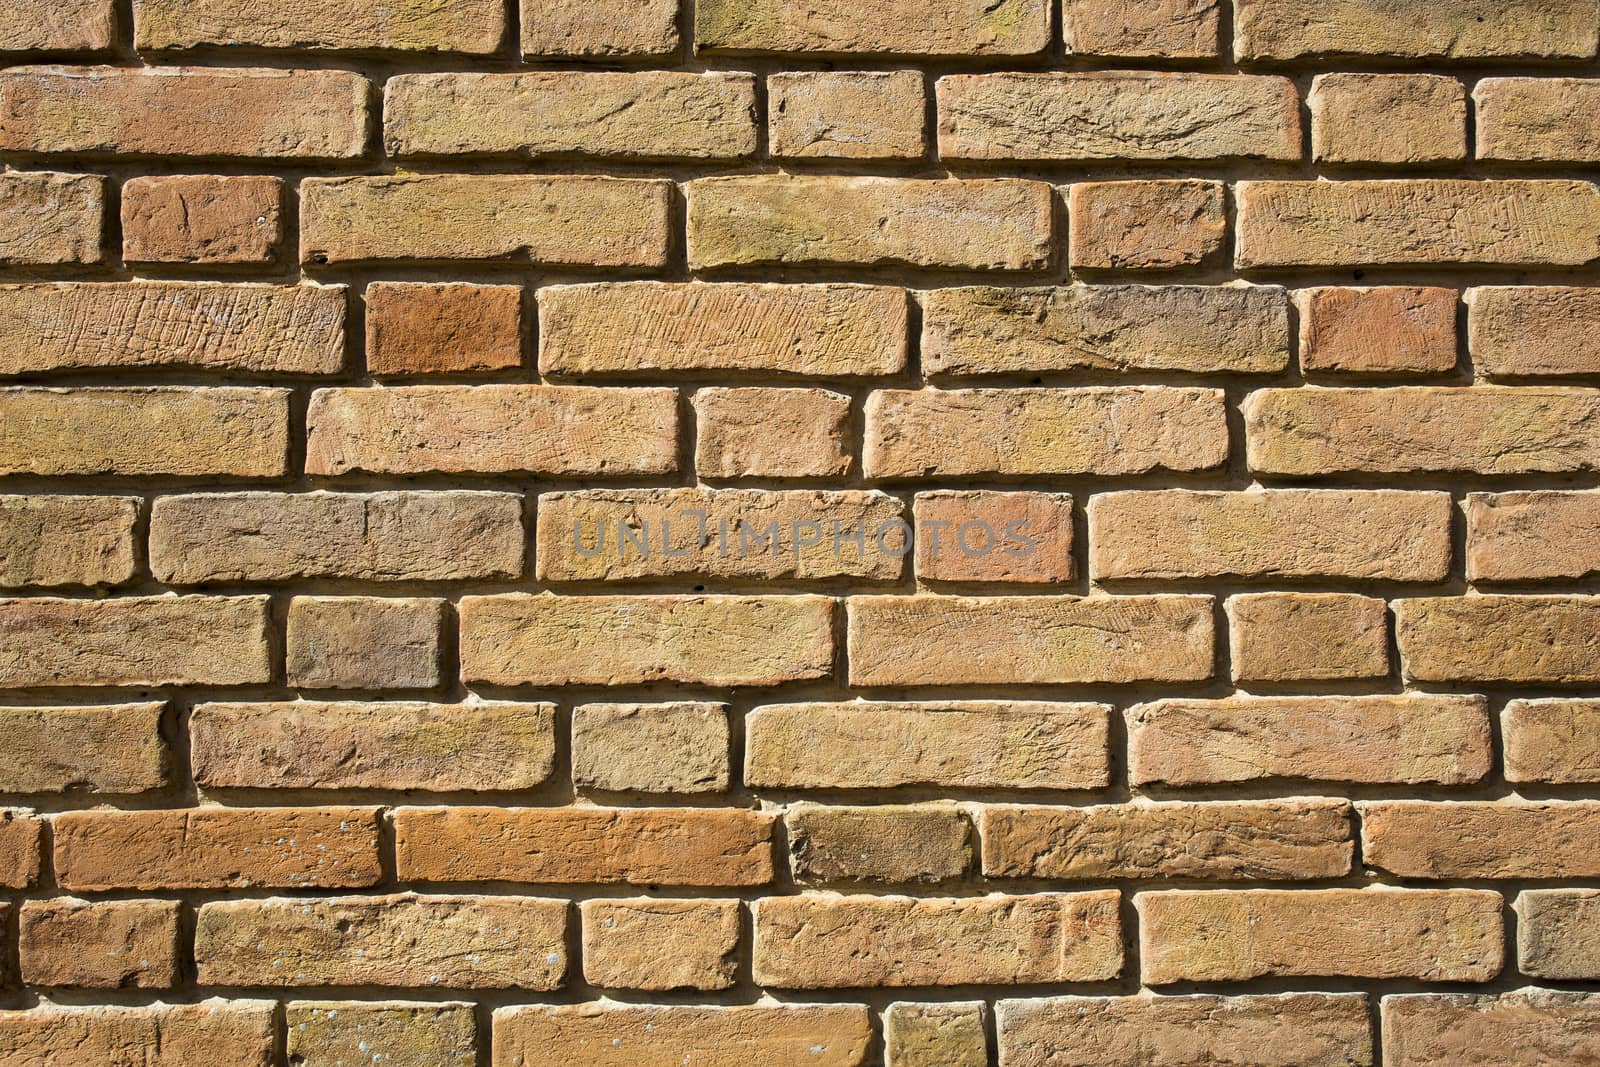 View of a detail of an ancient wall of bricks